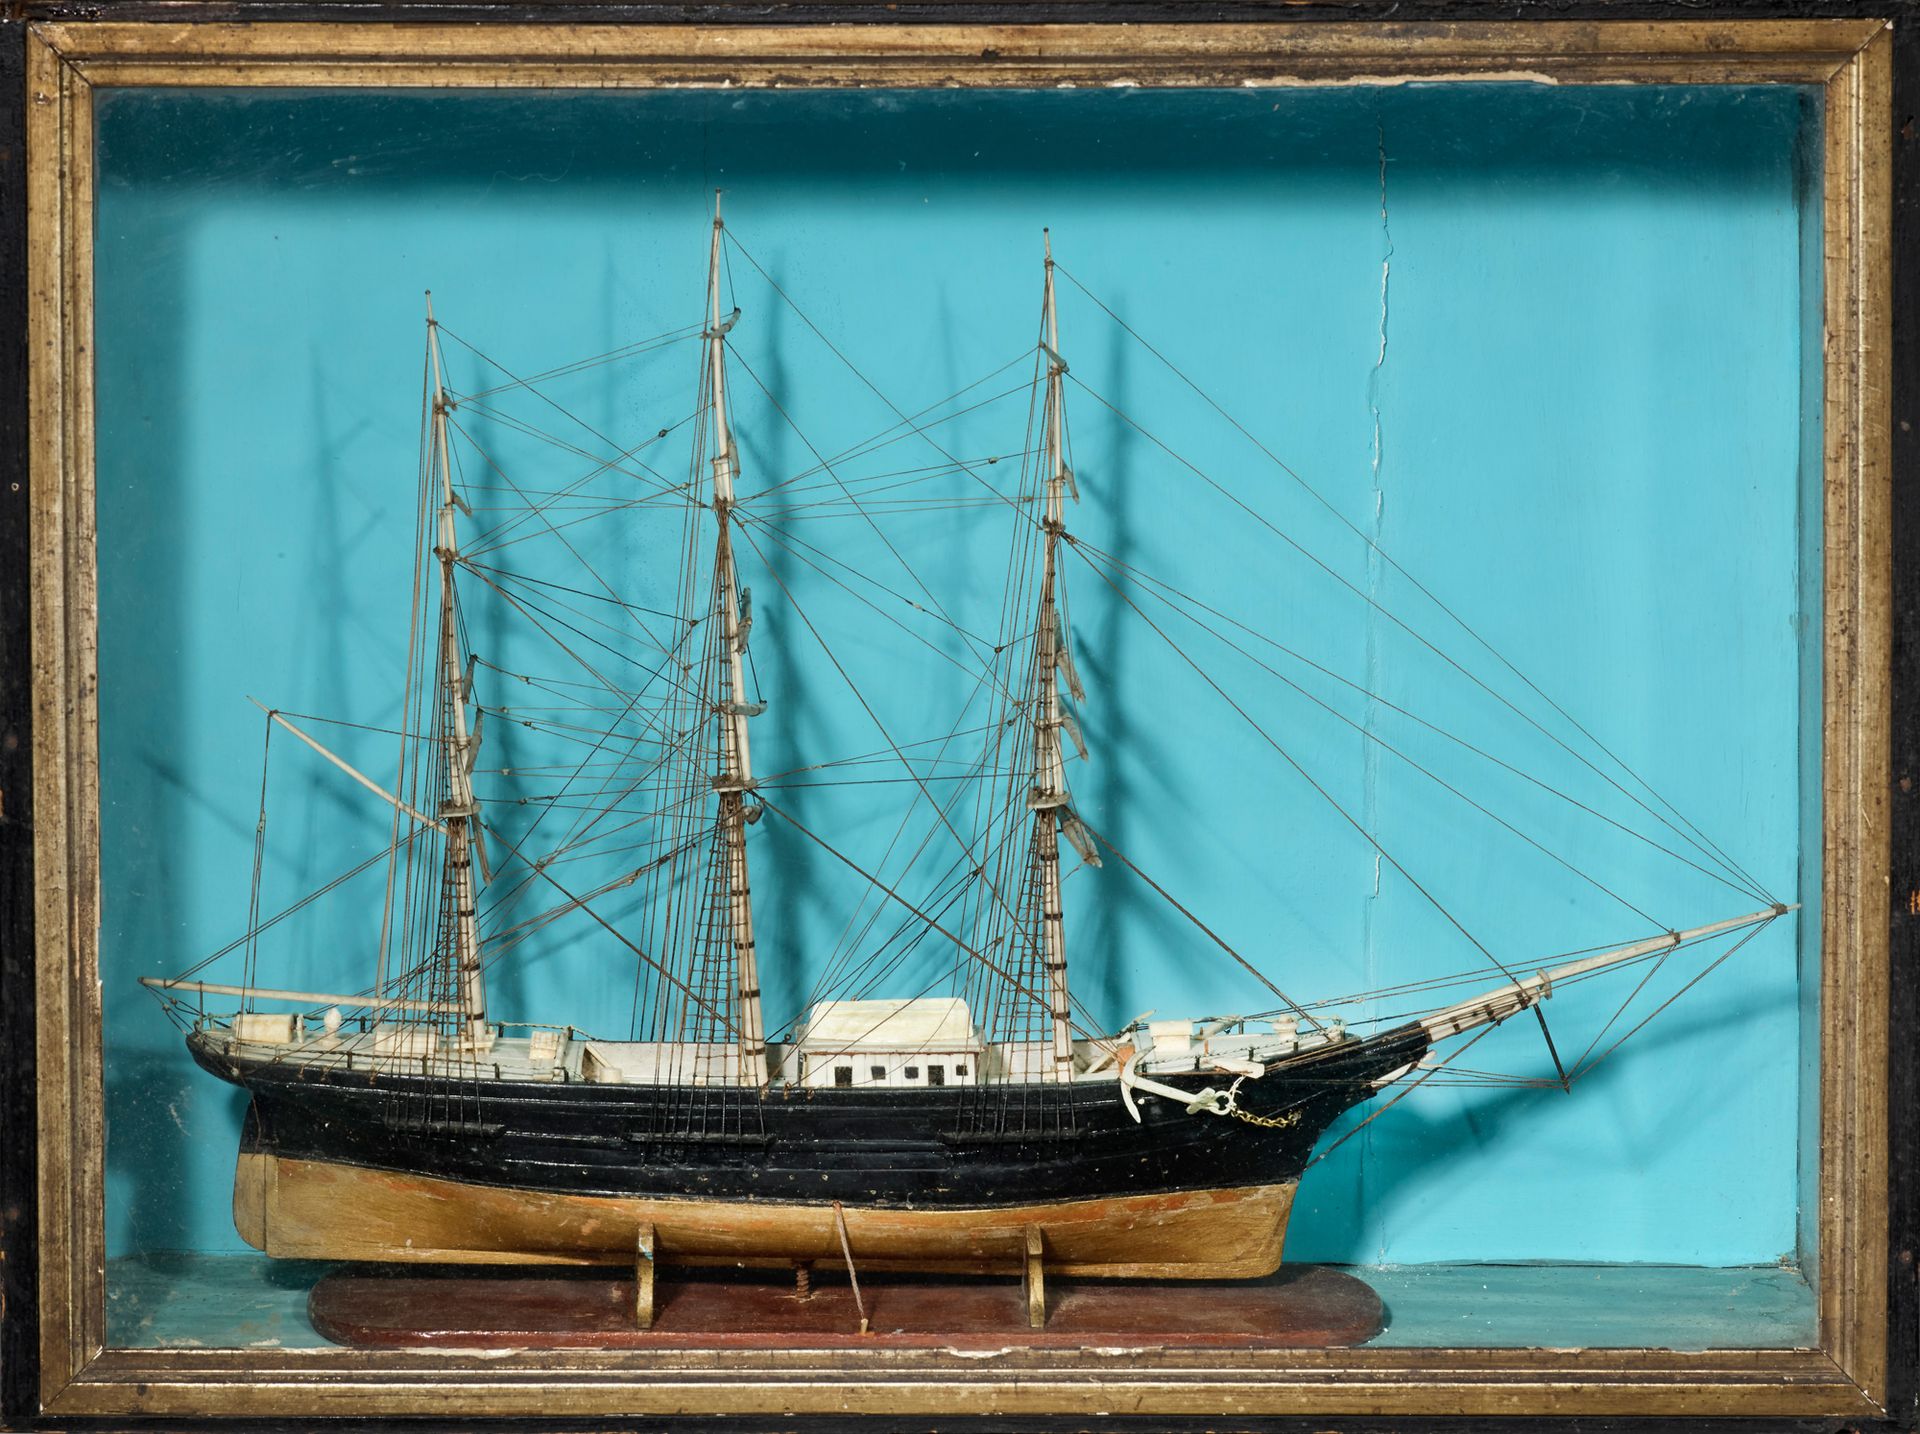 Null * Model of a sailboat in bone, ivory and wooden hull
45 x 50 cm